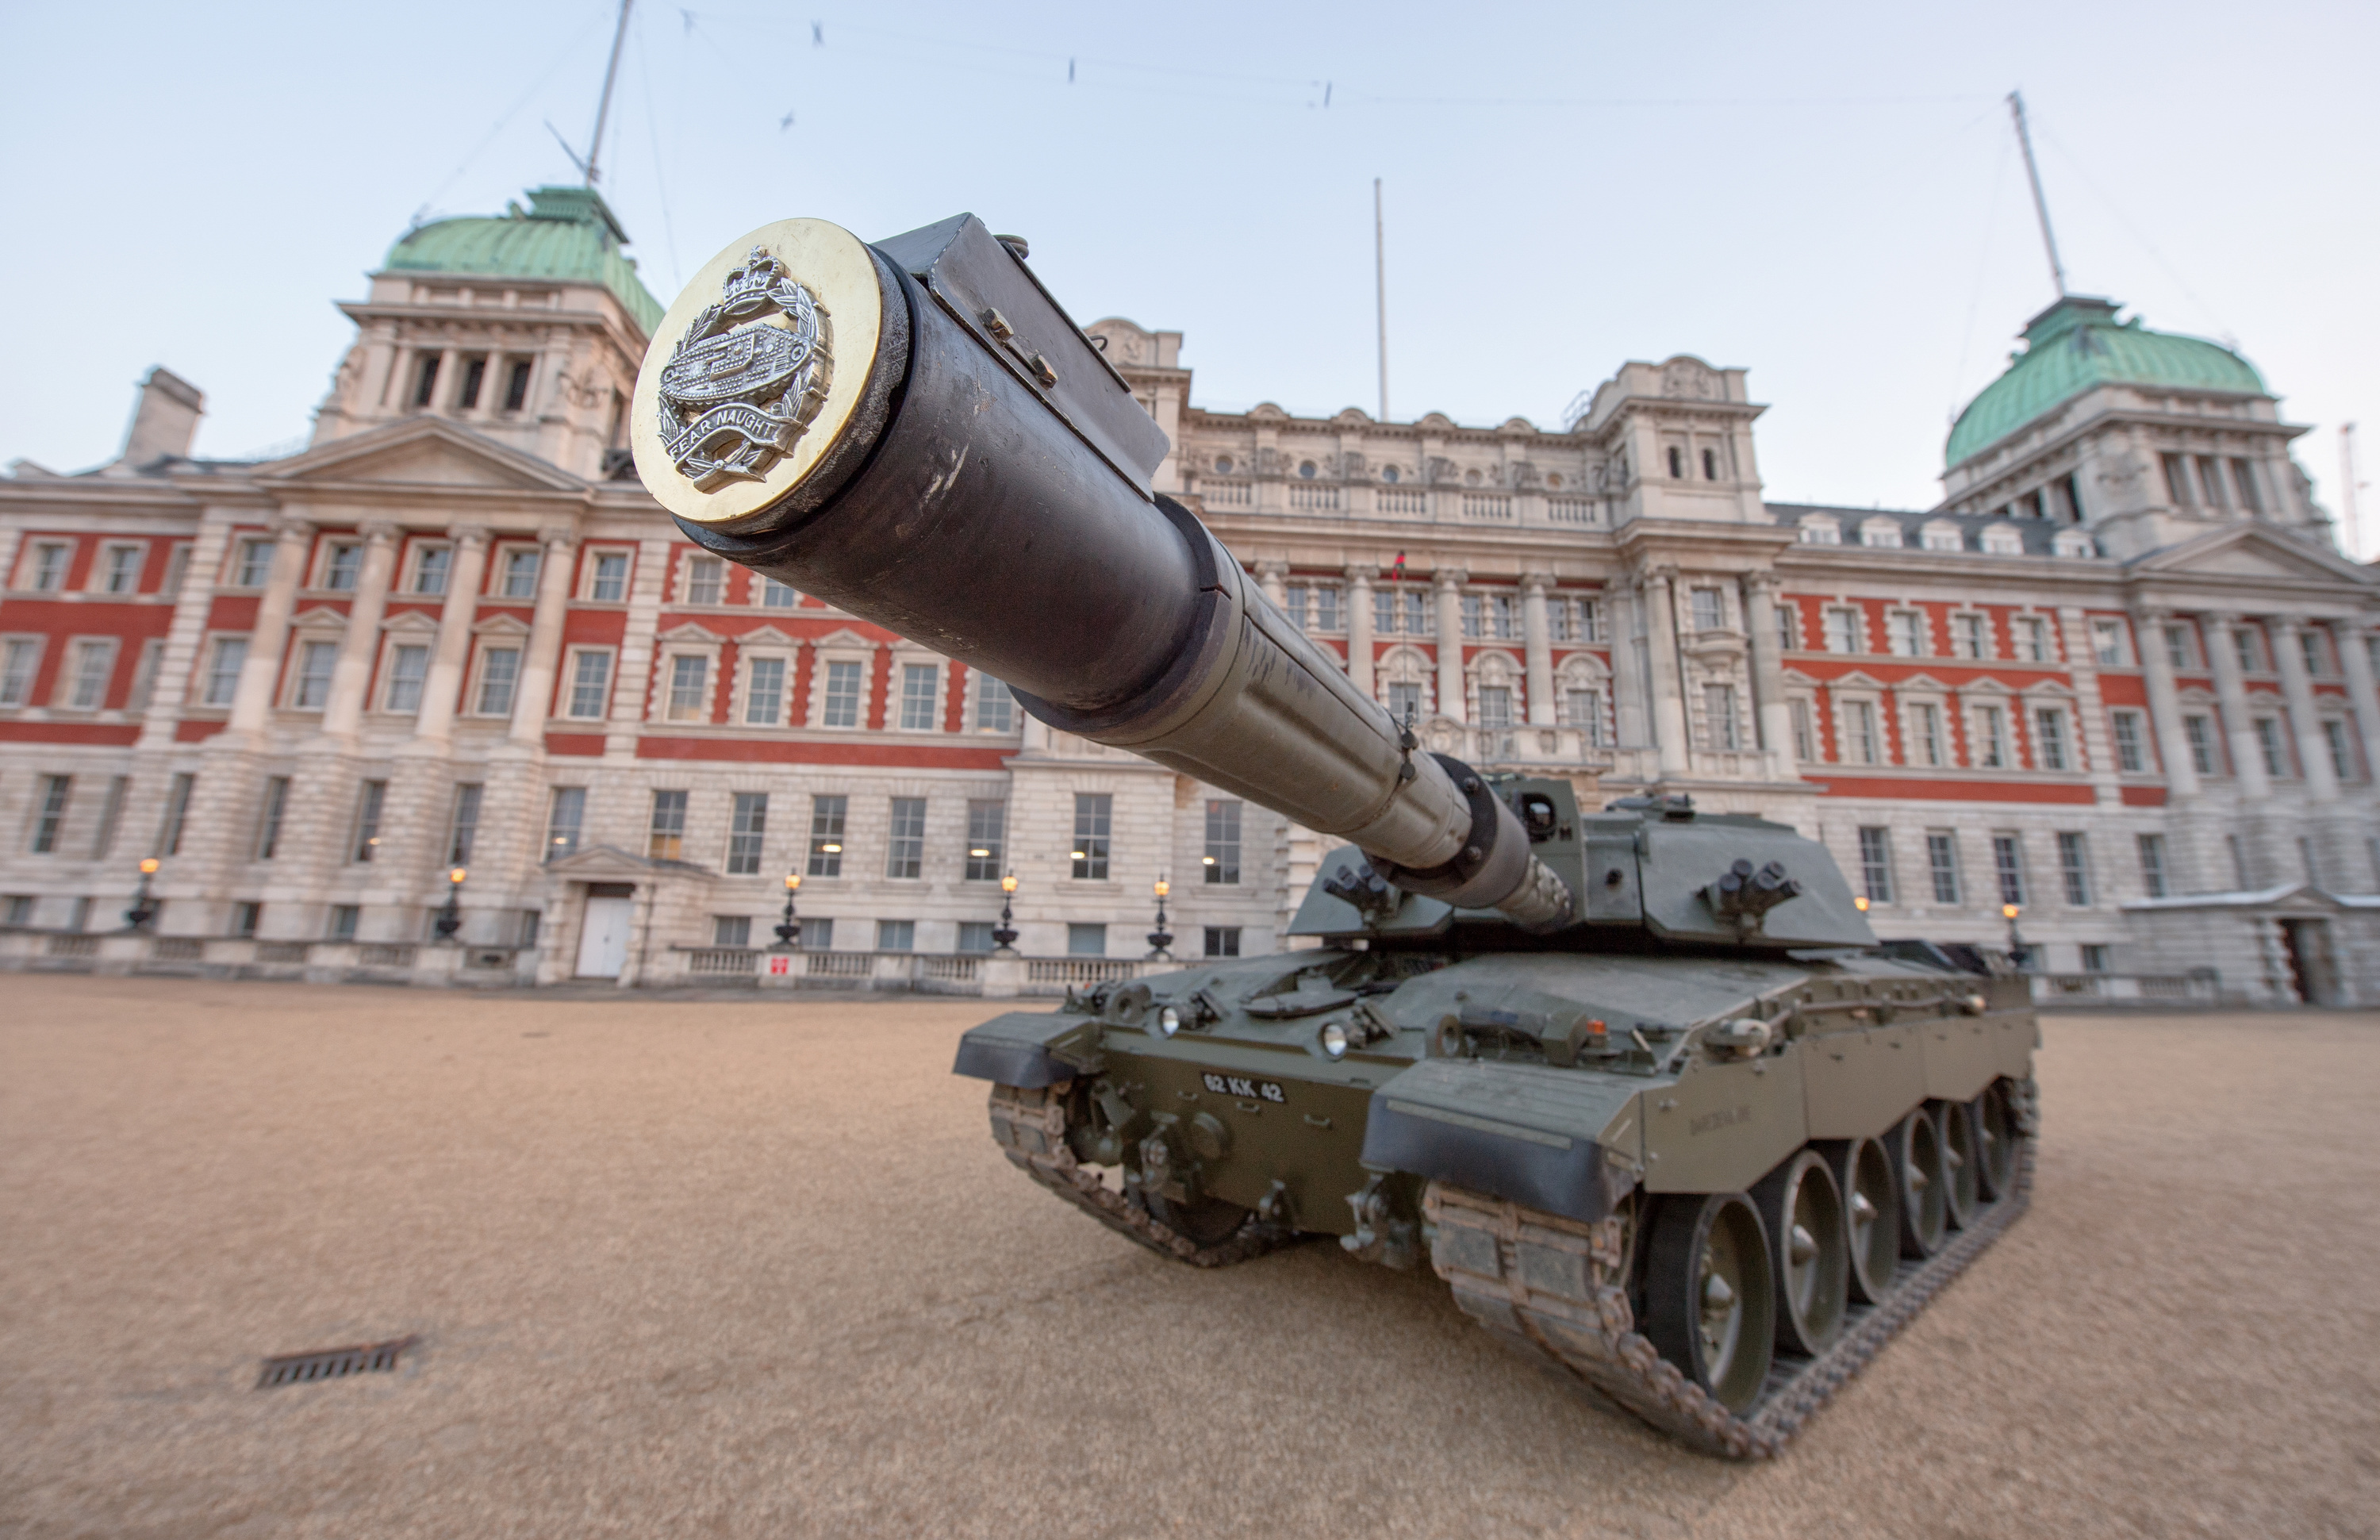 The Royal Tank Regiment, the oldest tank unit in the world, will commemorate 100 years since the Battle of Cambrai